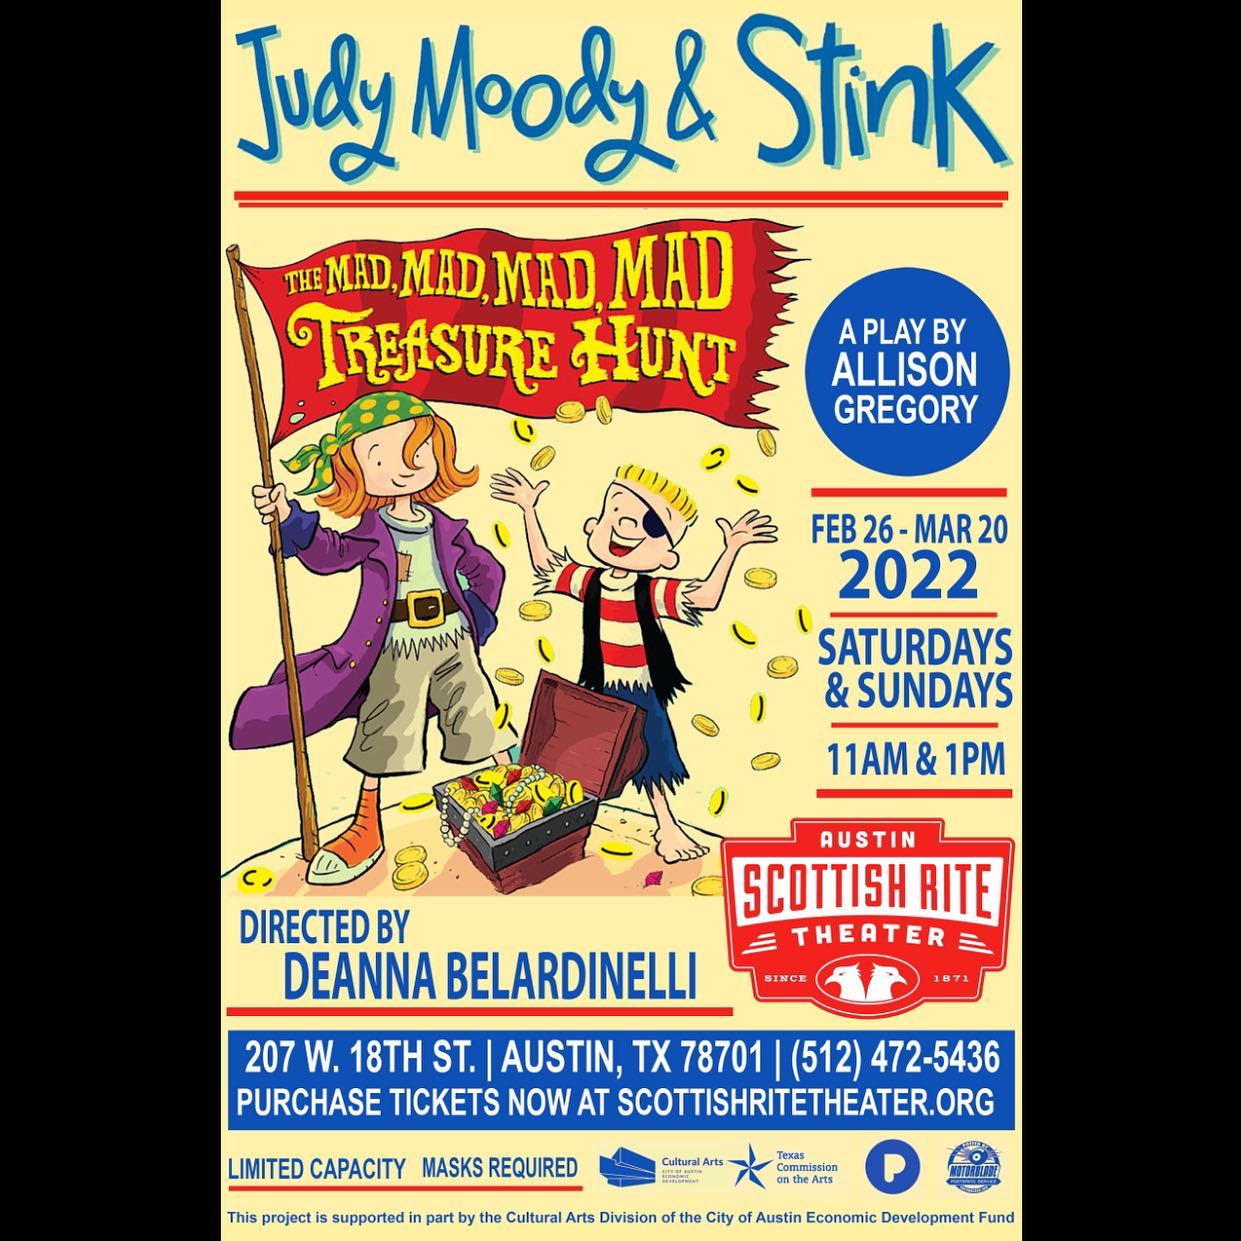 Judy Moody & Stink - The Mad, Mad, Mad, Mad Treasure Hunt by Scottish Rite Theater